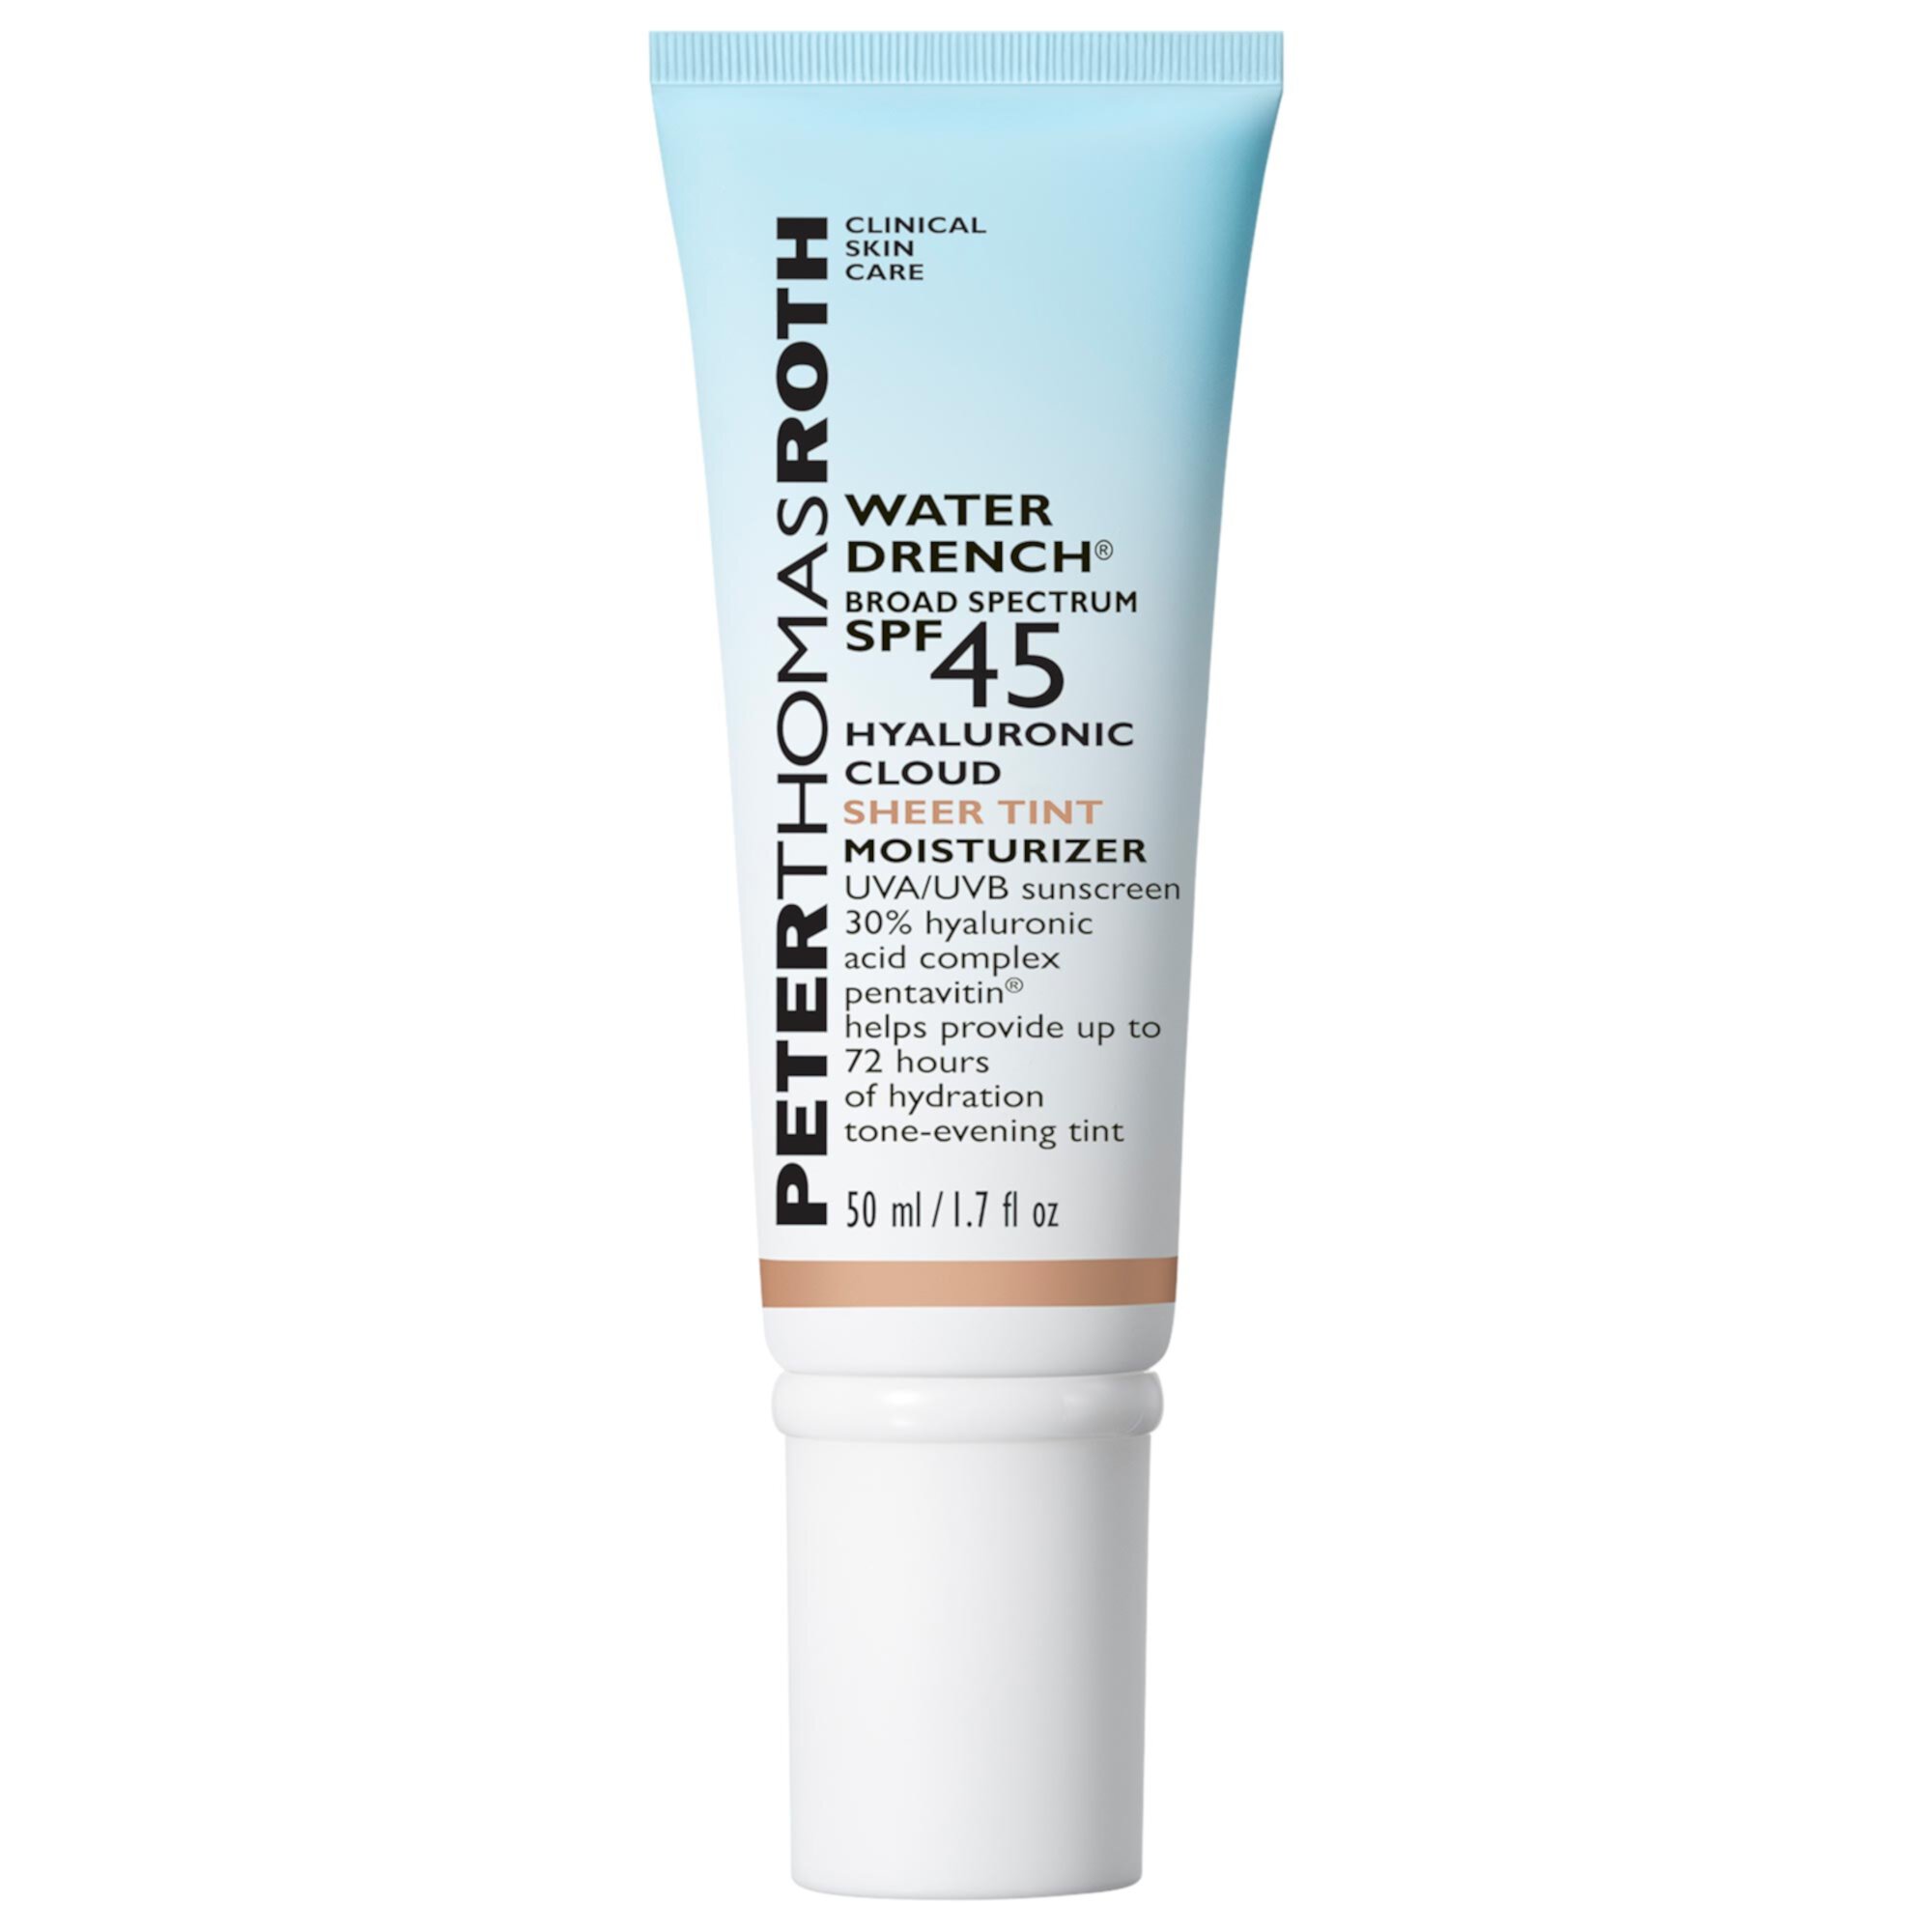 Water Drench® Hyaluronic Cloud Sheer Tint Moisturizer Broad Spectrum Sunscreen SPF 45 Peter Thomas Roth